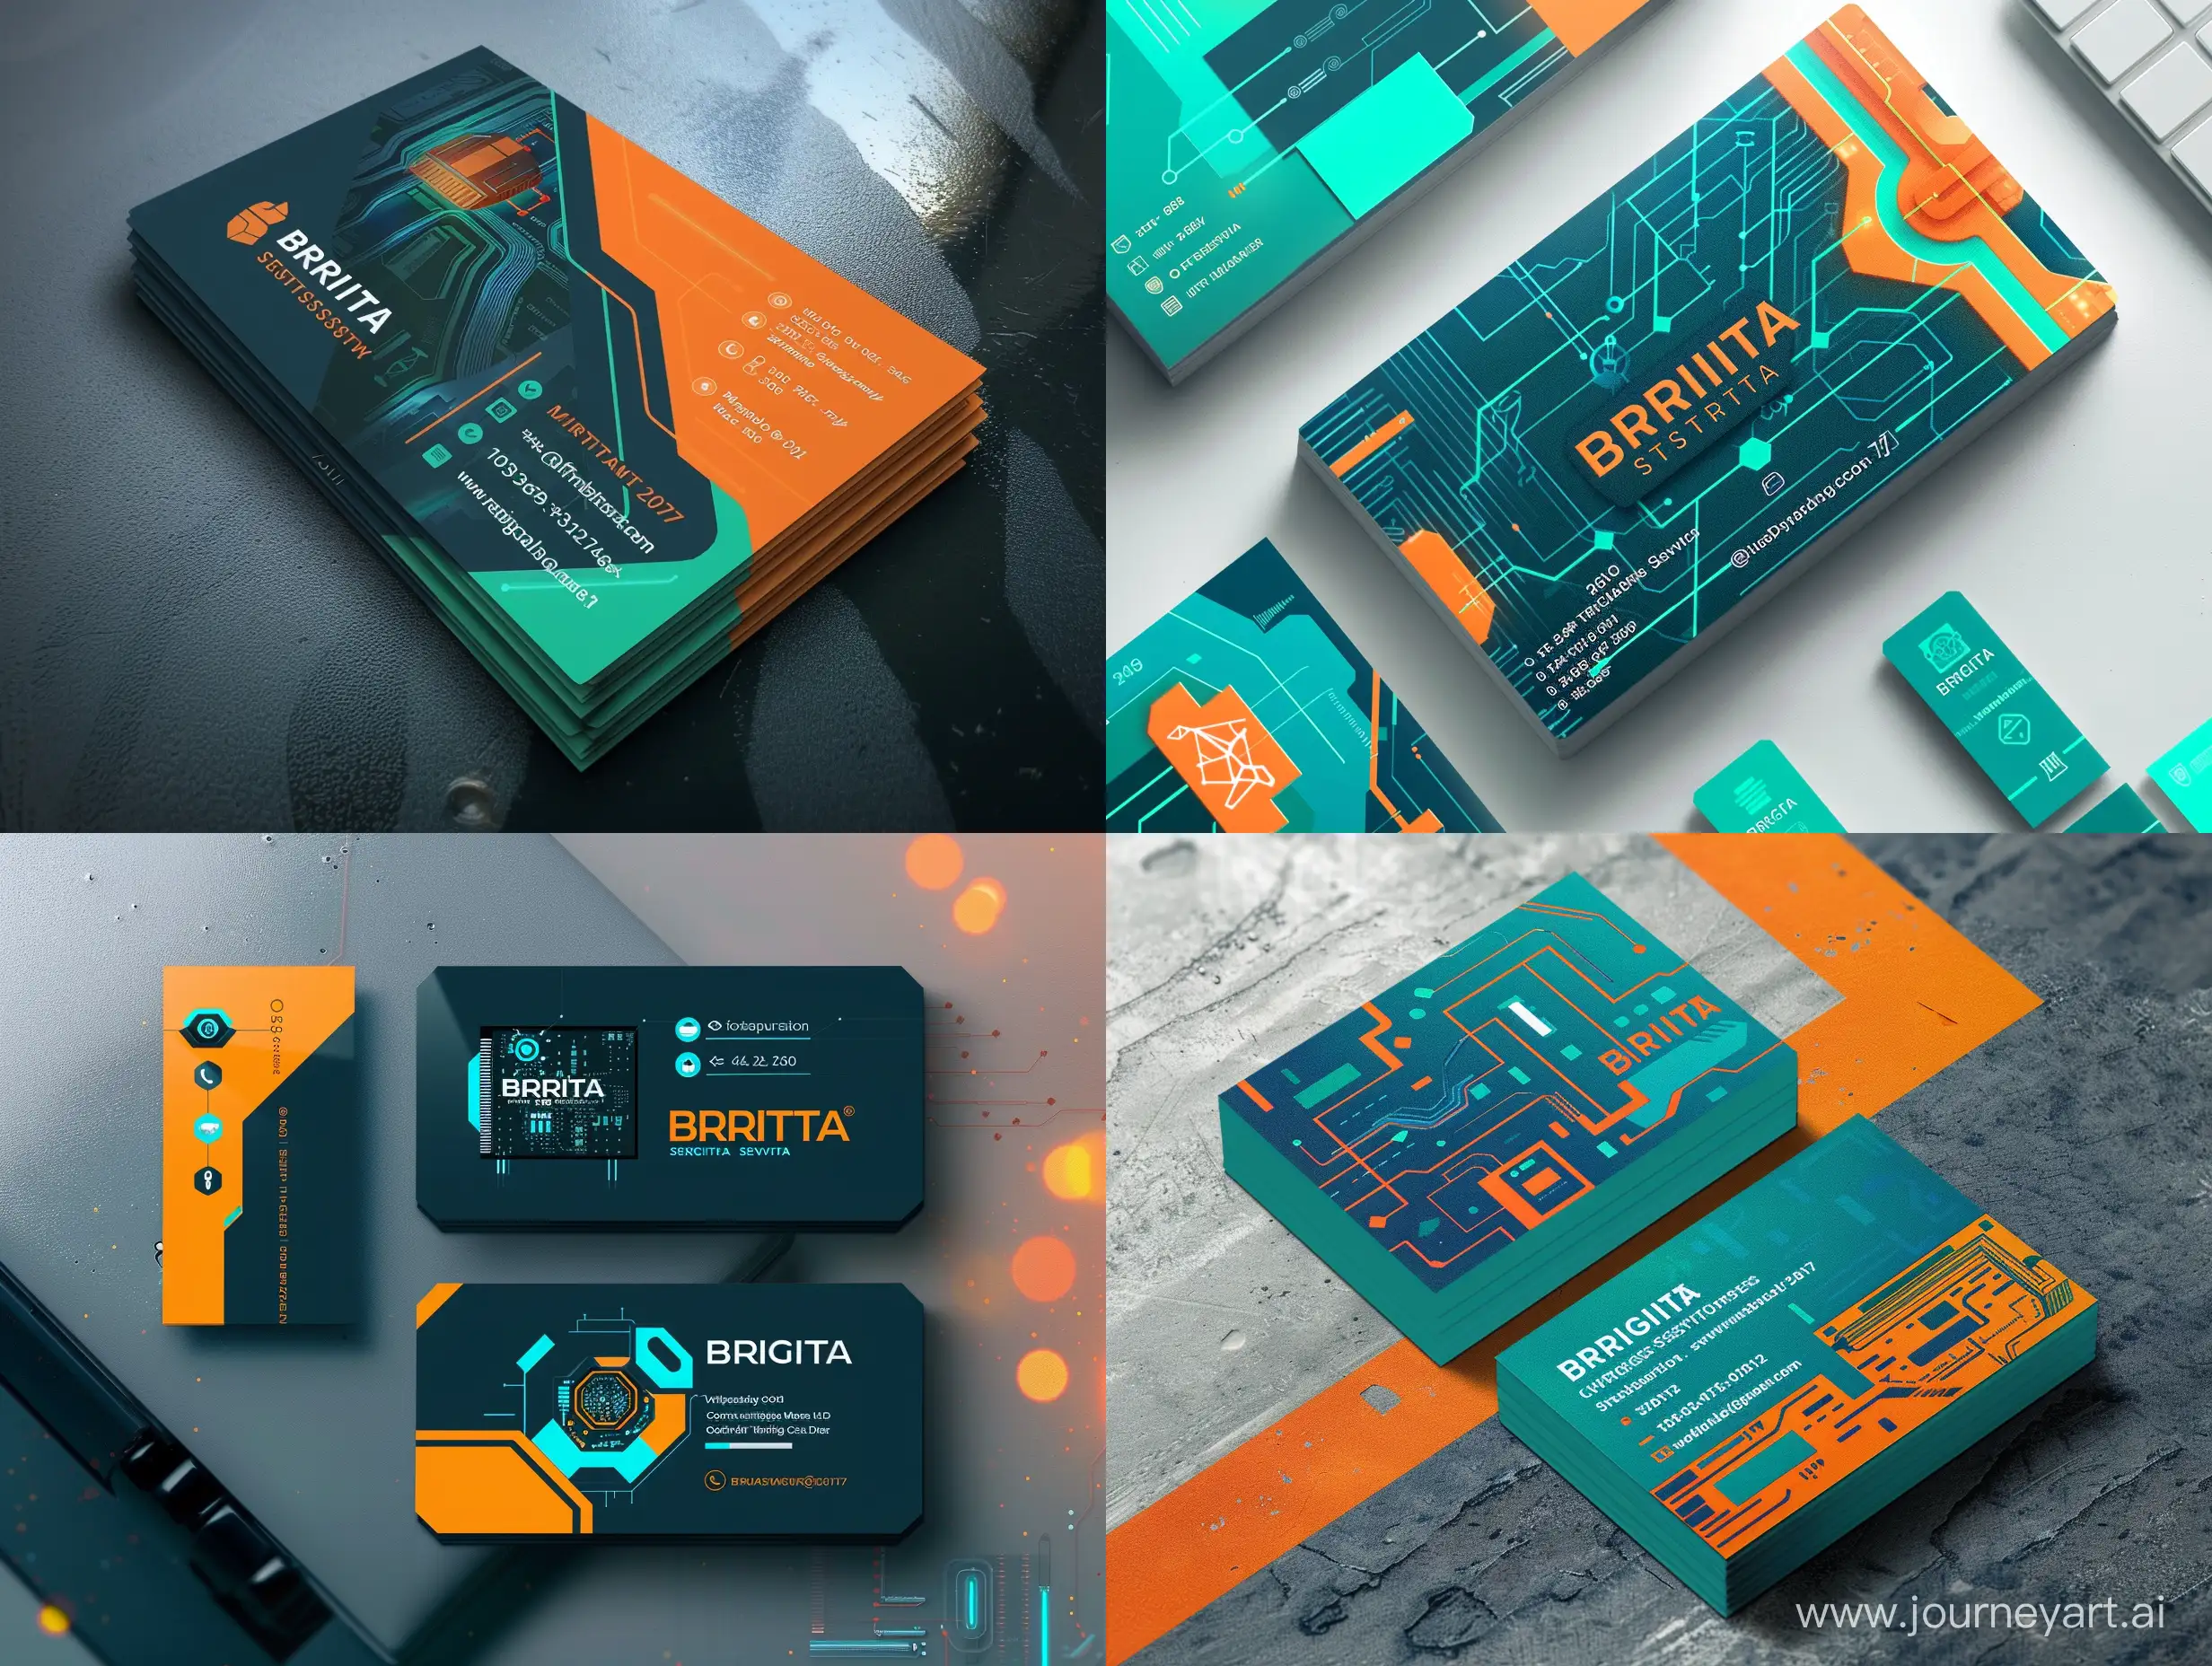 Come up with a design of a business card  for the Cybersecurity Systems Engine of the company name BRIGITA. The company provides information technology  and Cybersecurity services. The corporate colors are orange, blue and light green. The design should be rest to cyberpunk 2077.